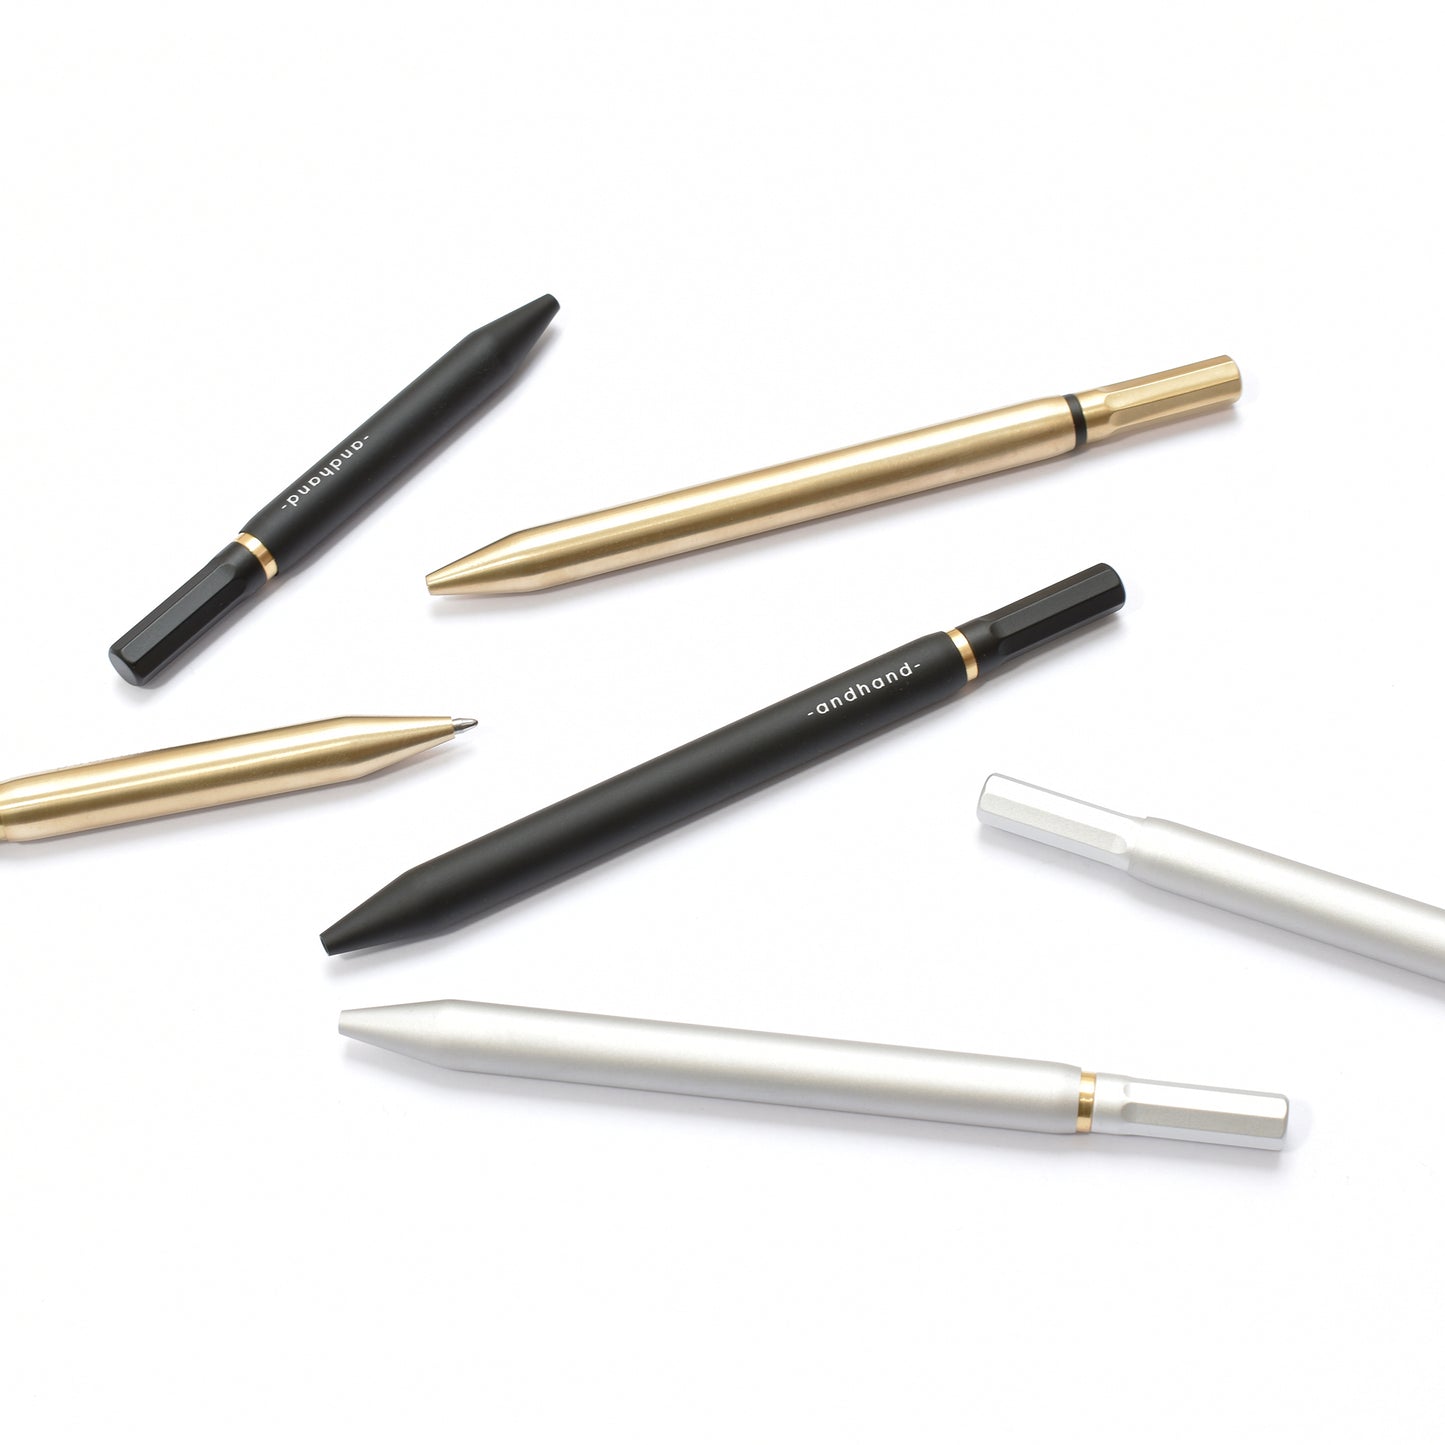 Solid brass ballpoint pen from Andhand. An expertly precise writing tool featuring a smooth mechanism and modern minimal design. Amazingly durable and refined.